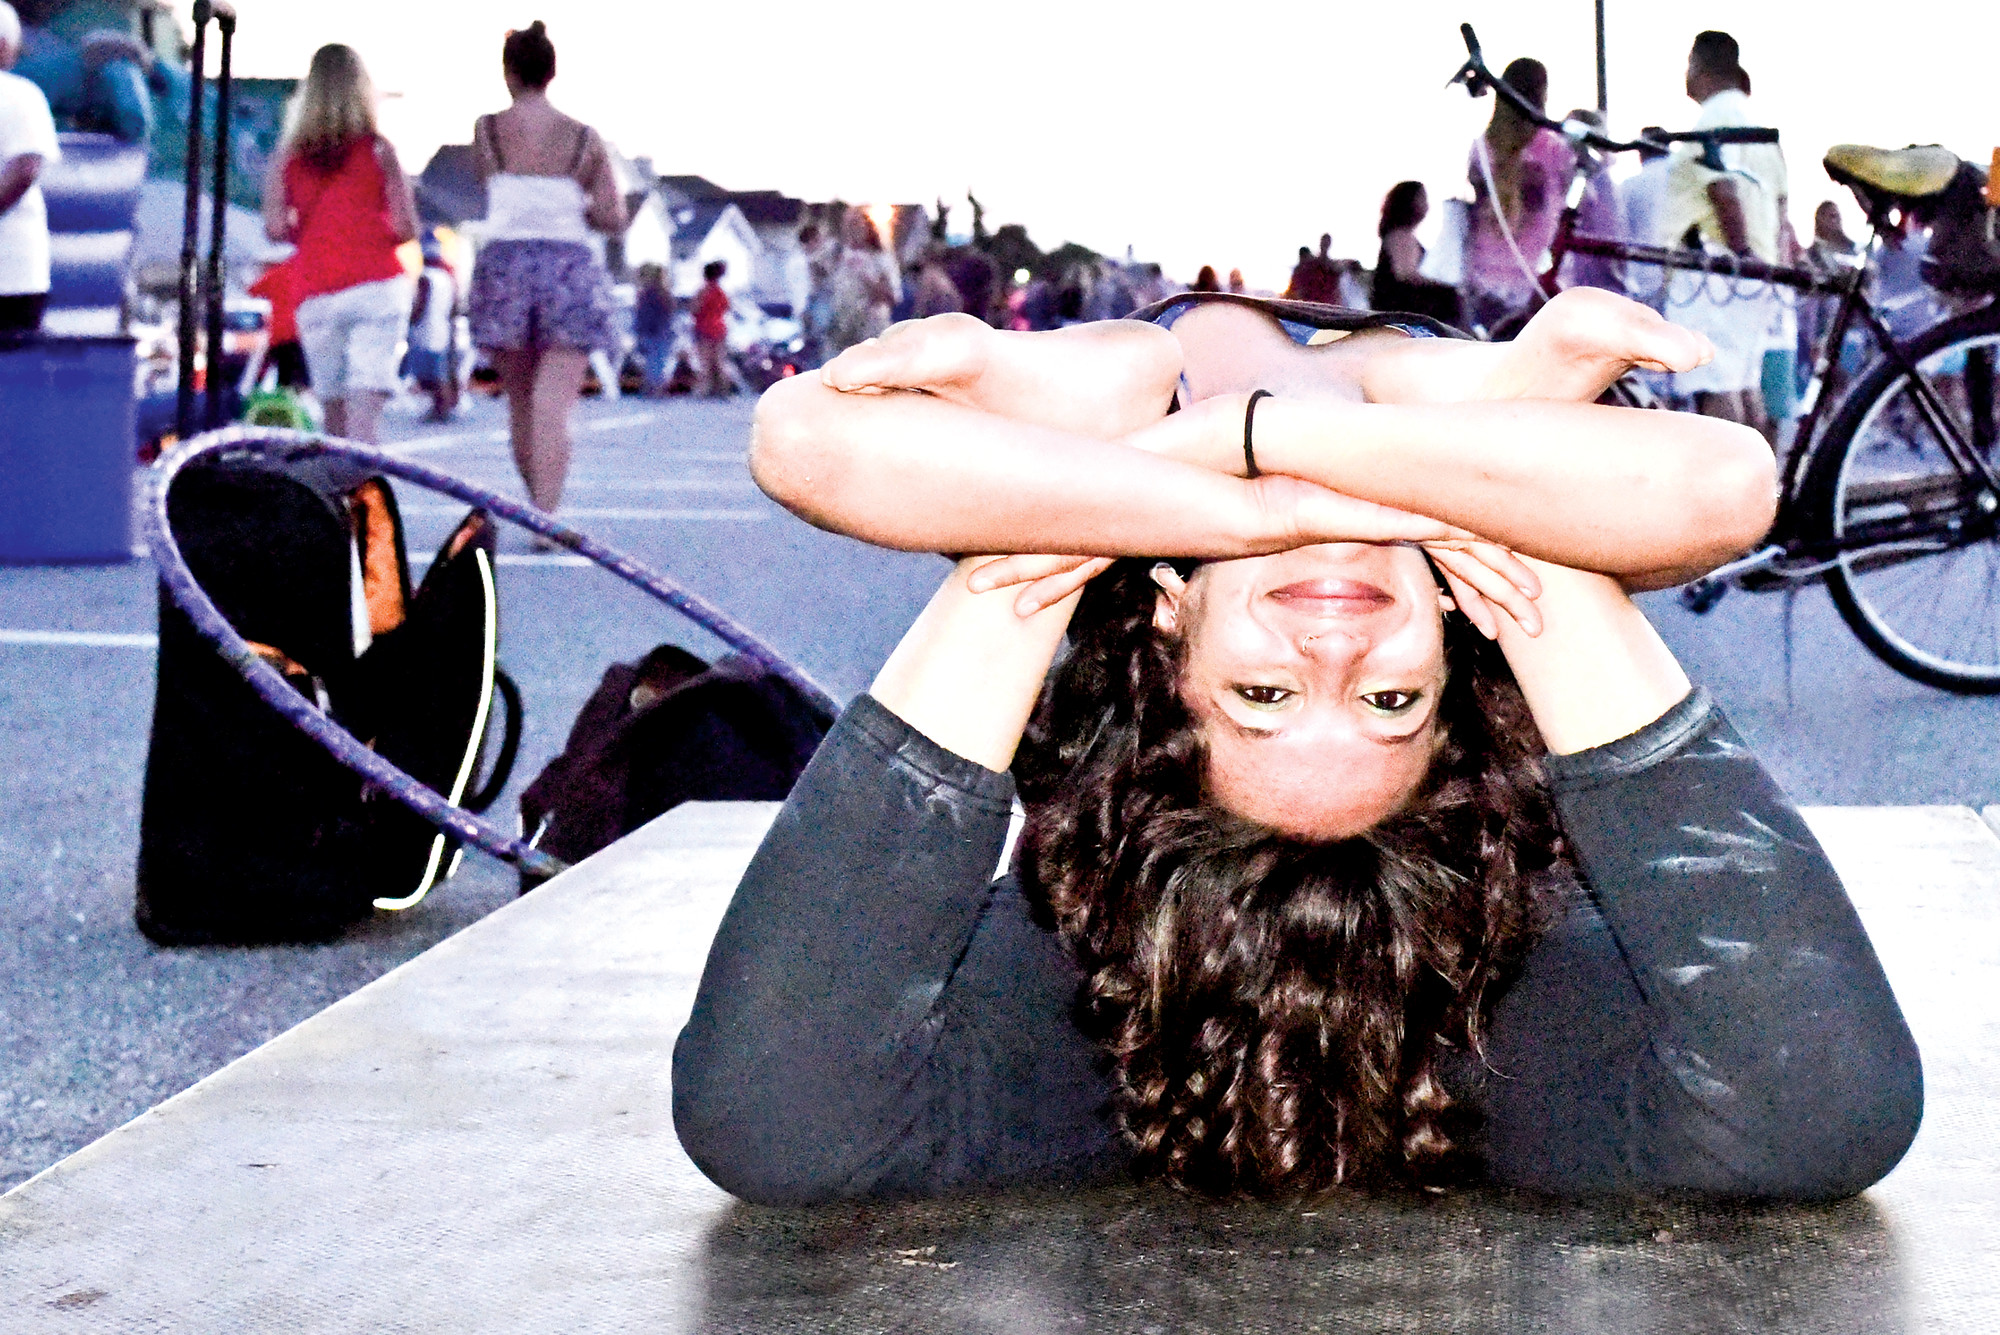 Shipra Saraogi — a contortionist and fire-eater — entertained spectators at the Sunset Celebration event on Saturday.